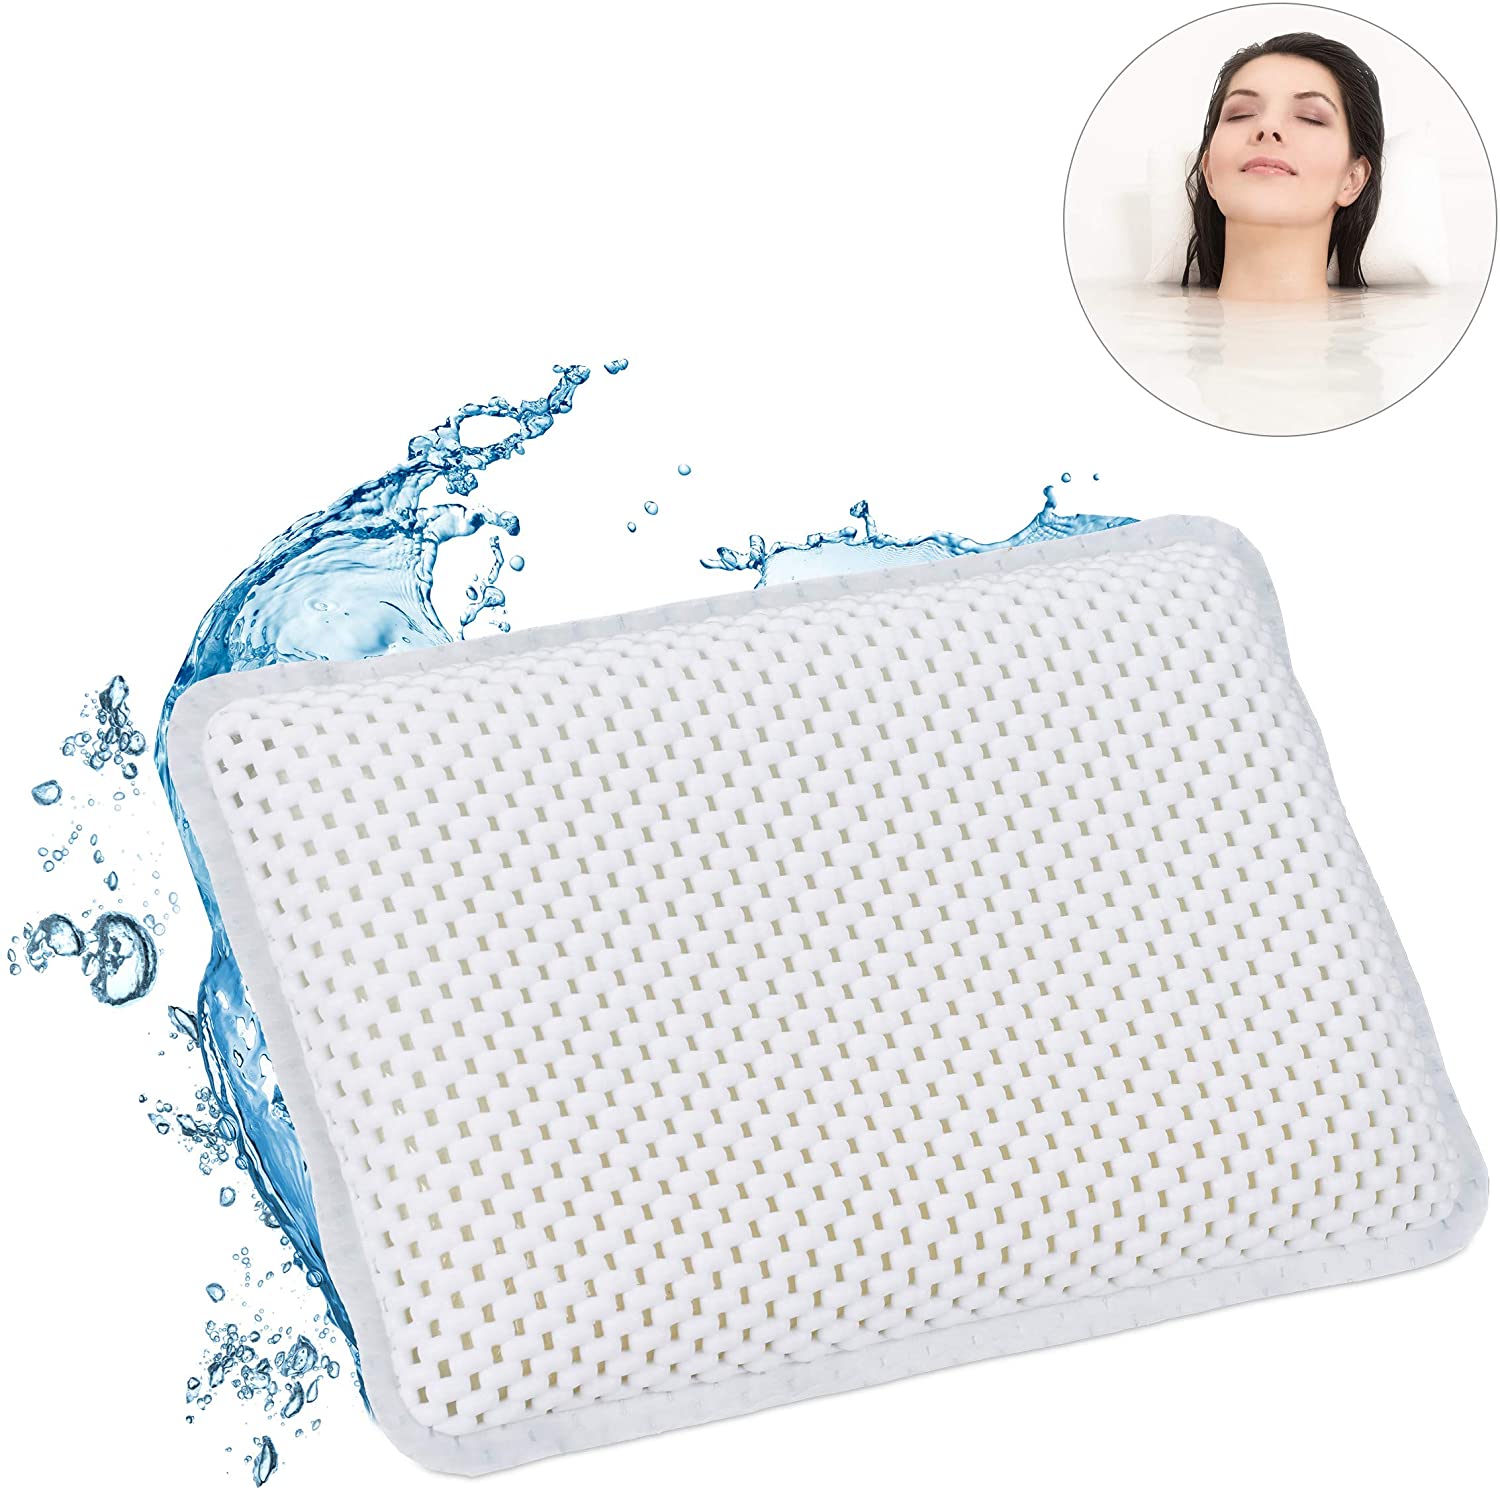 Relaxdays Bath Pillow With 8 Suction Cups For Head And Neck 19 X 28.5 X 5.5